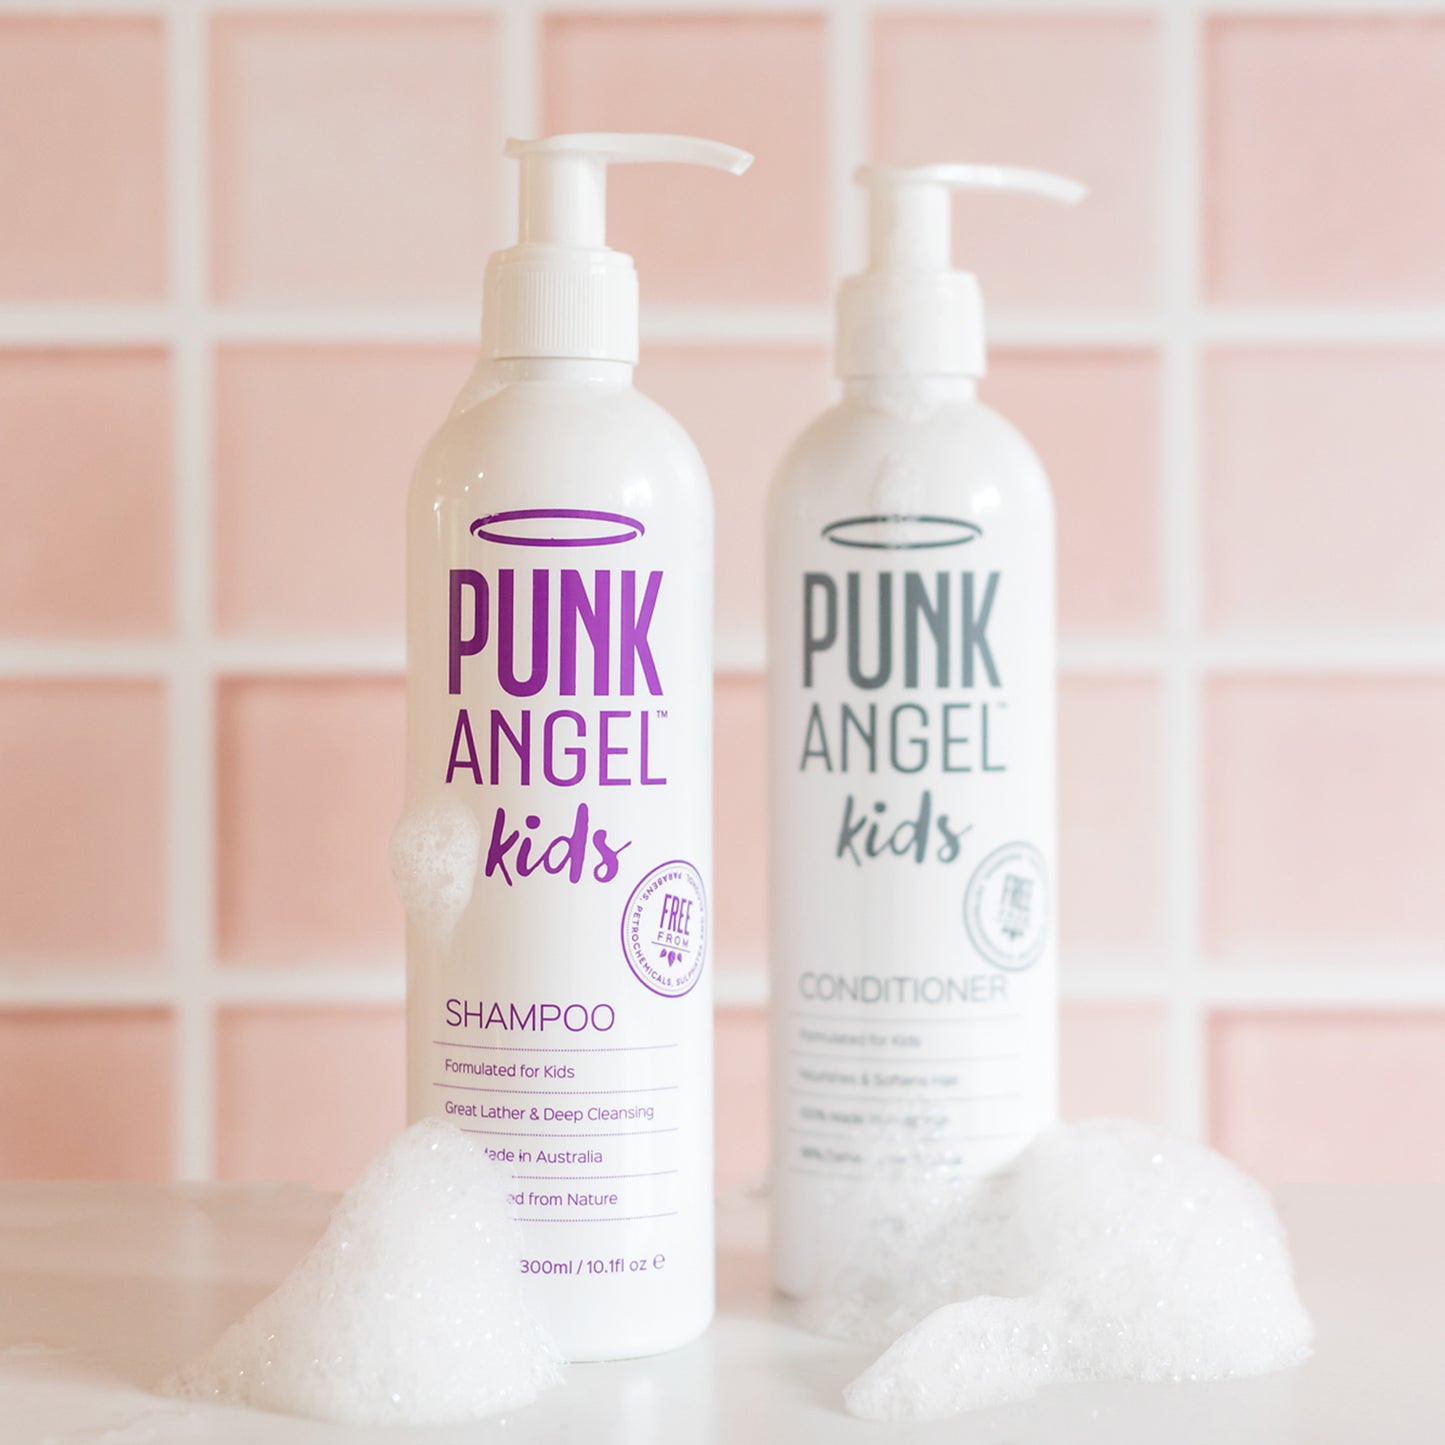 Punk Angel Wash, Tame & Hold Value Pack